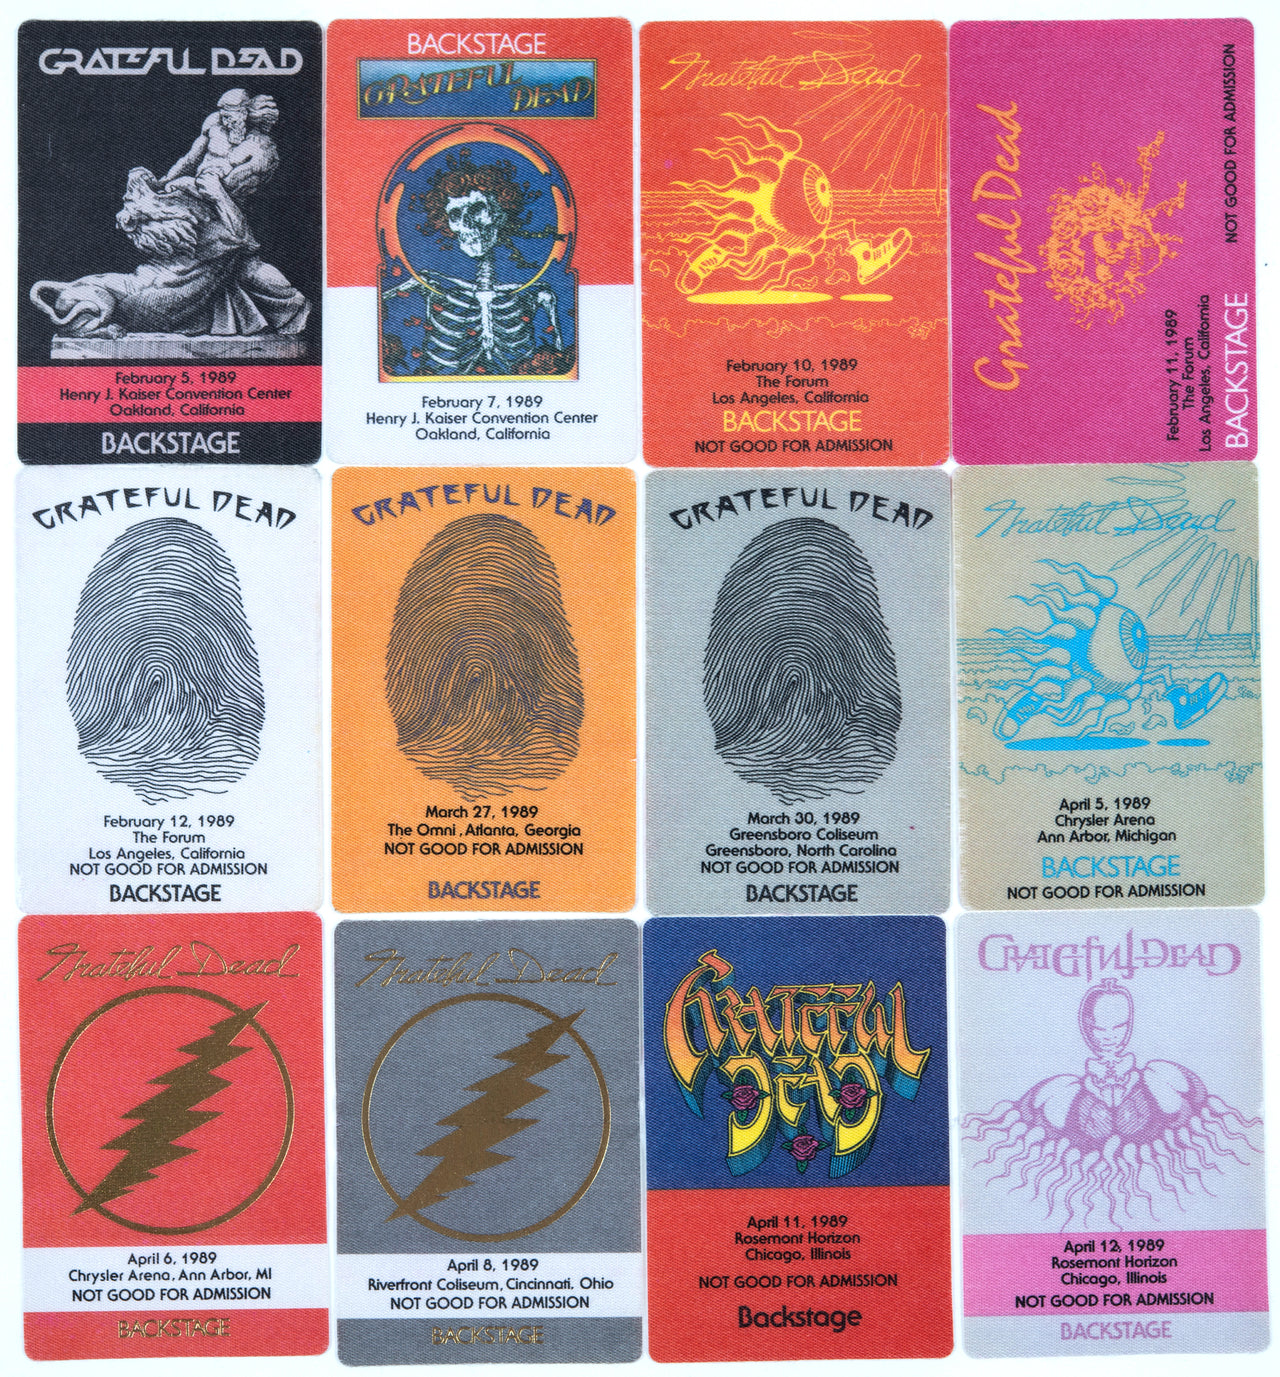 Grateful Dead Backstage Passes (2/5/1989 - 4/12/1989) from Dan Healy